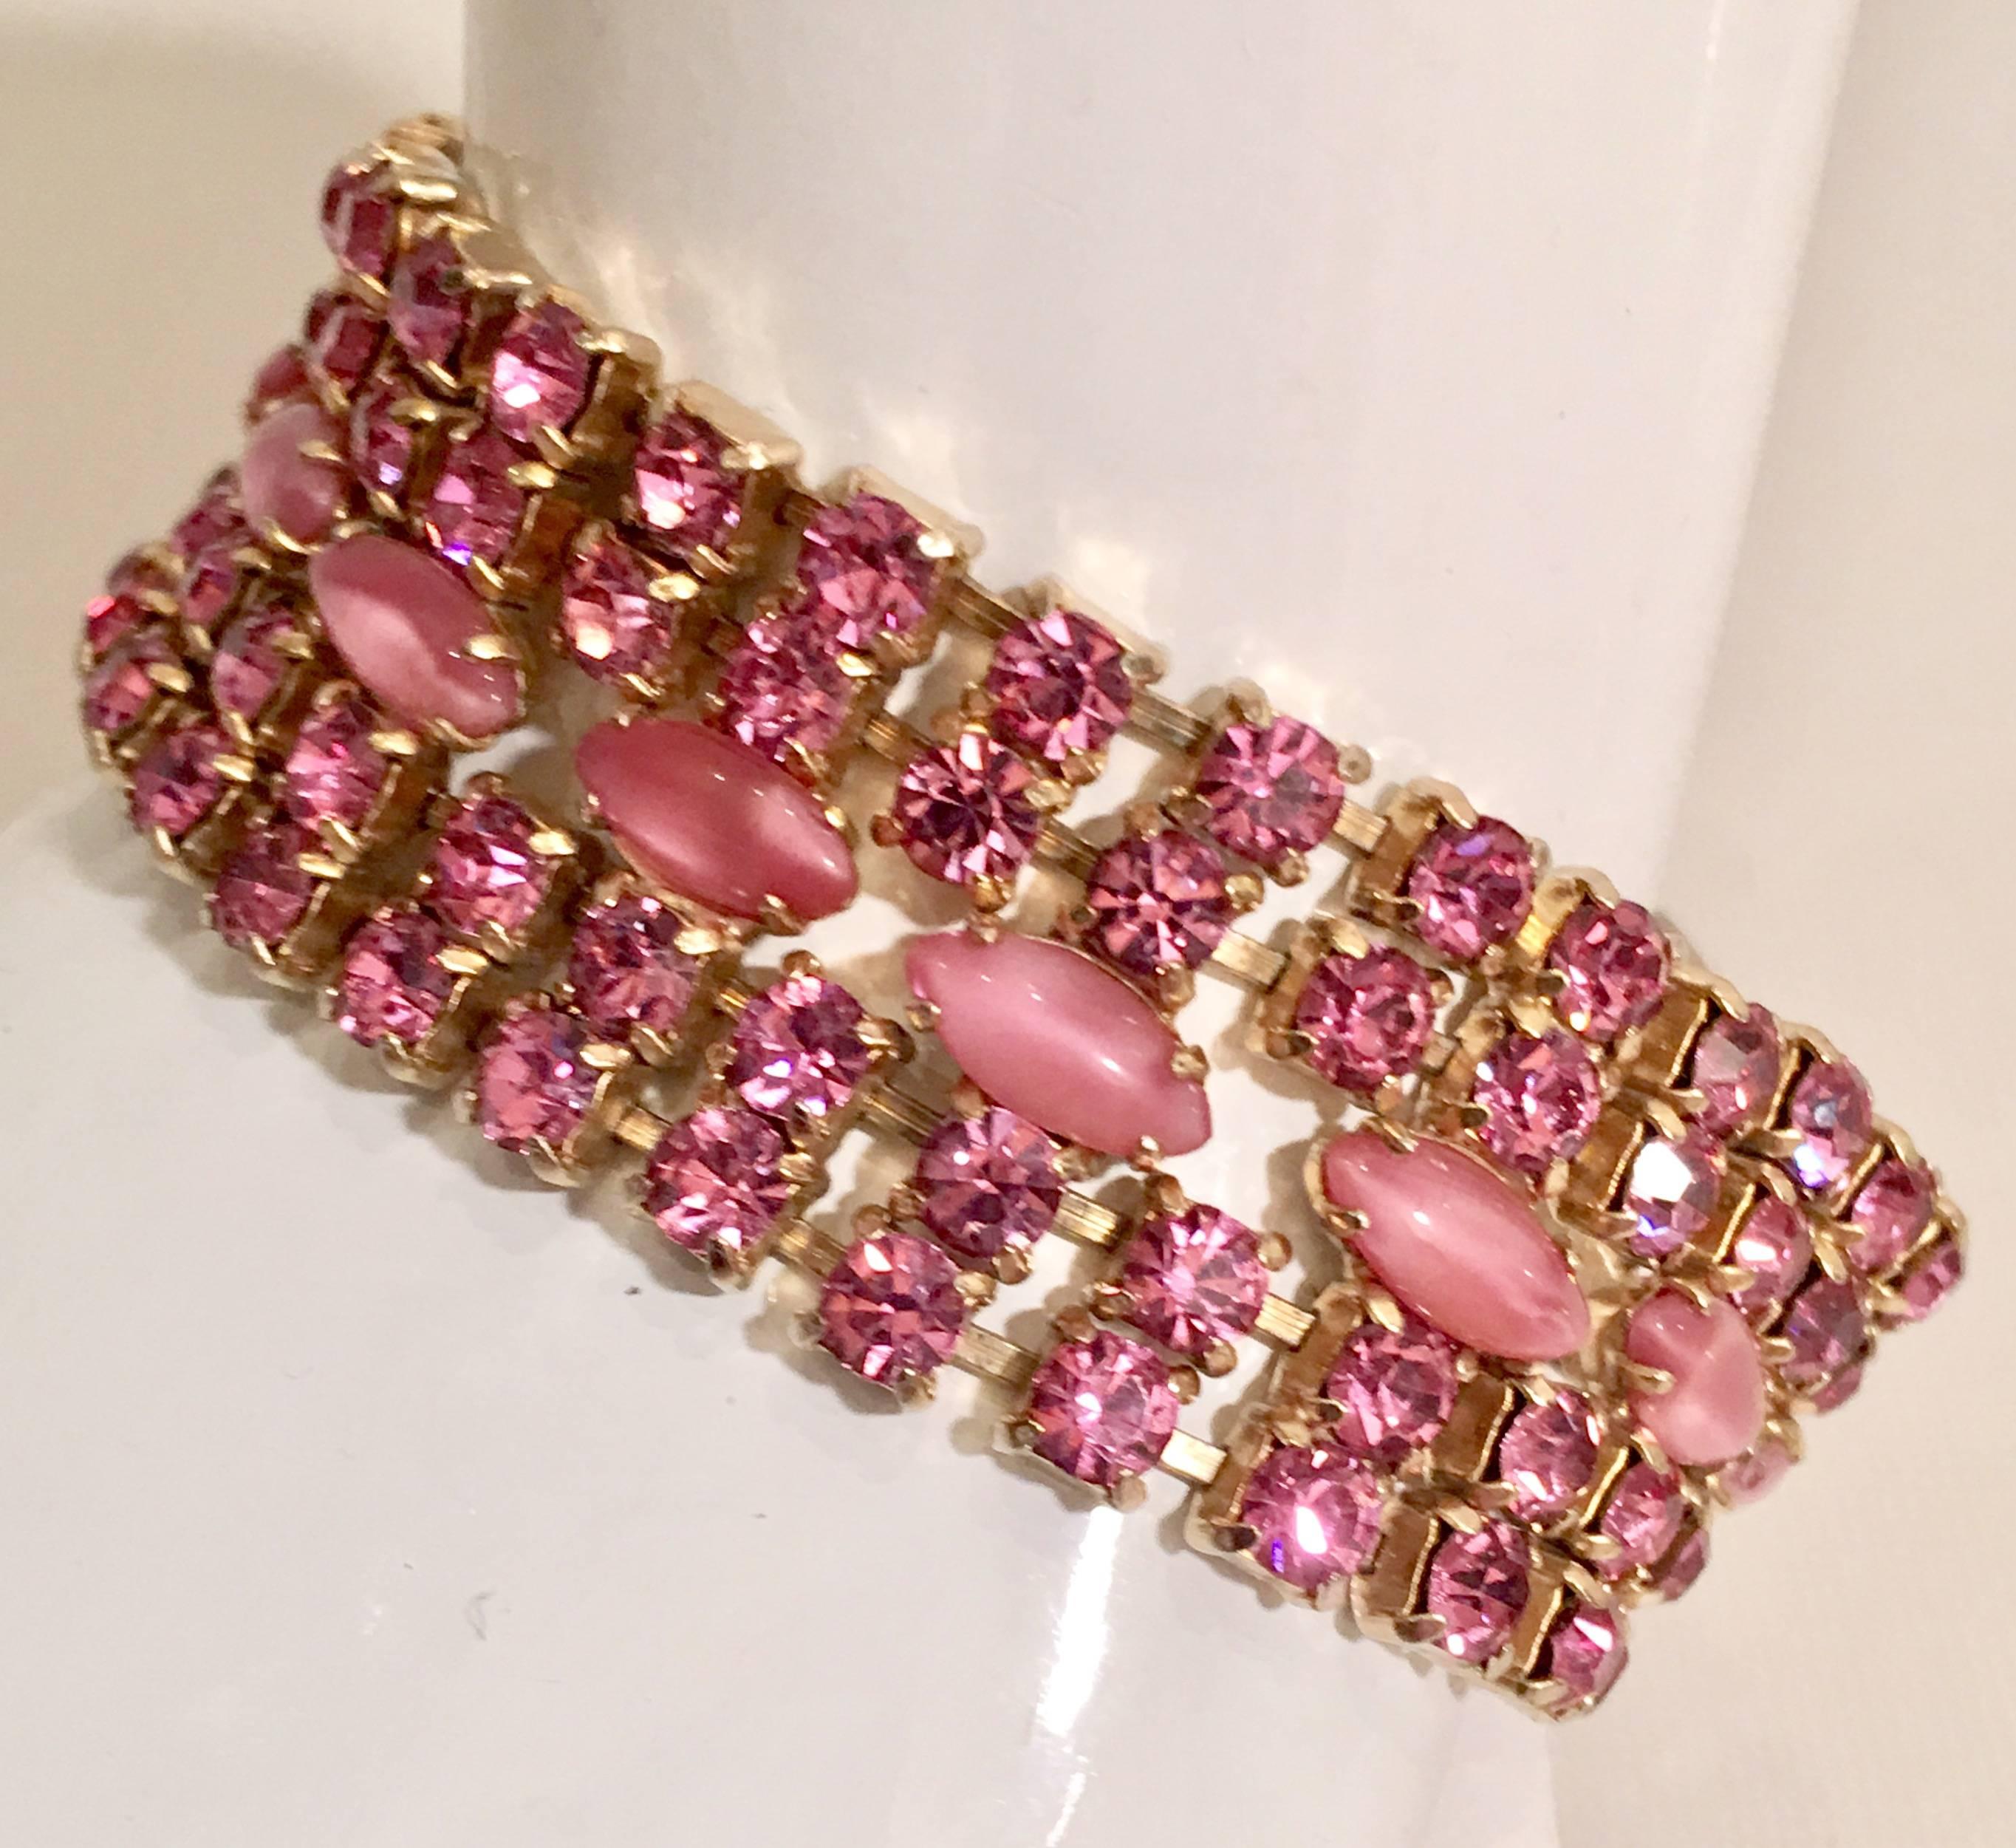 1970s vibrant pink crystal and pink oval opal rhinestones set in gold plate metal. This stunner is an unmarked piece.